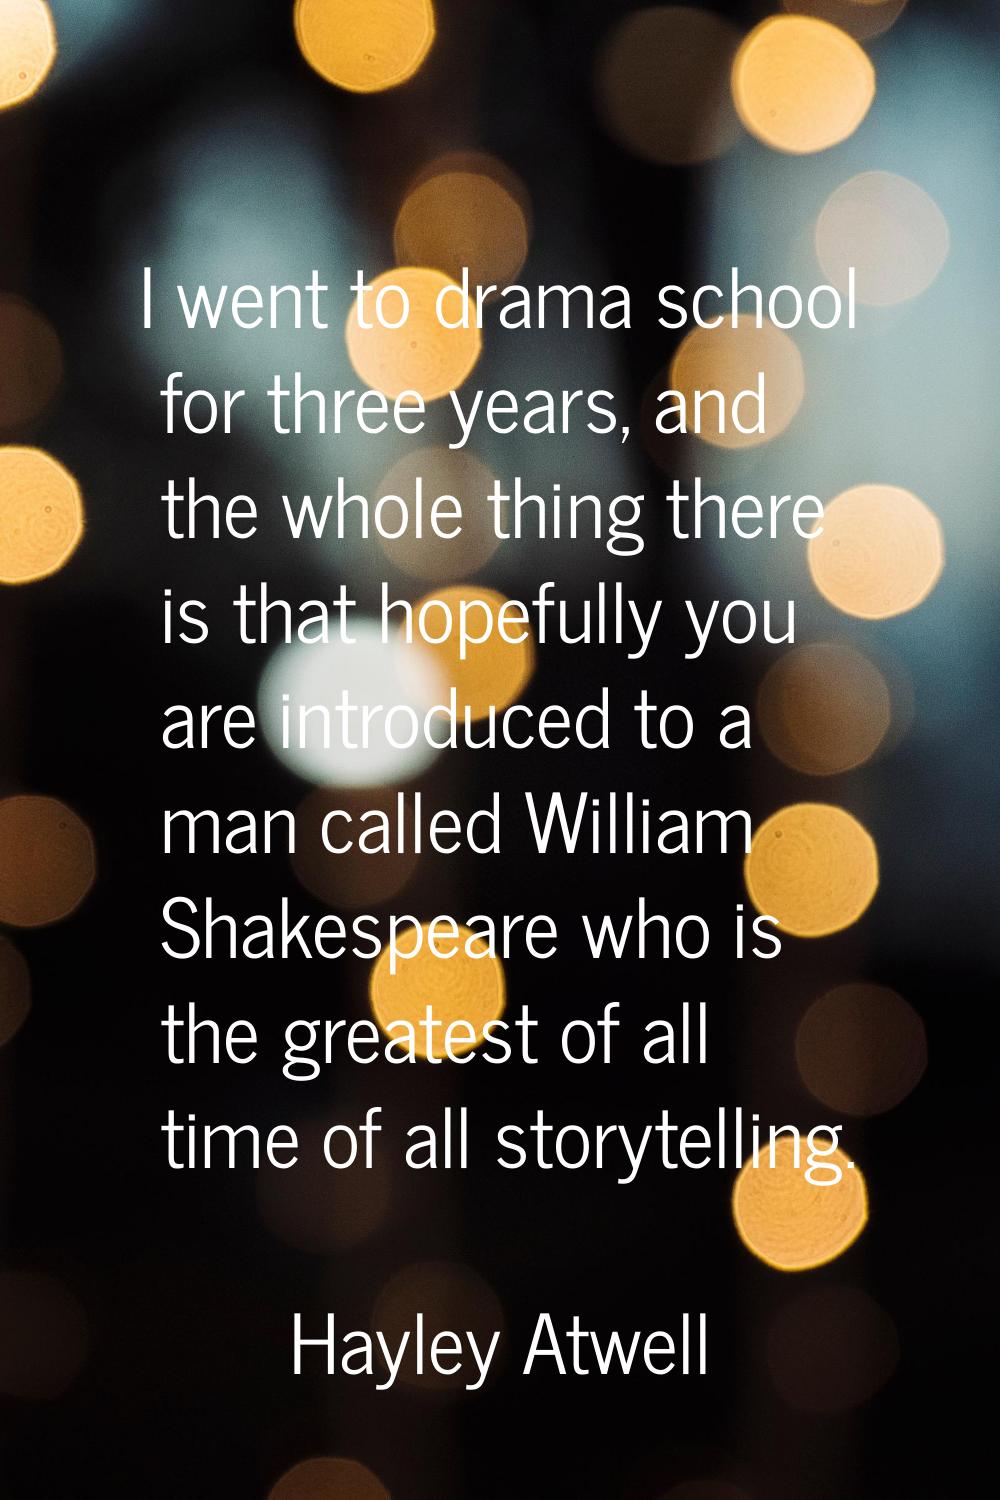 I went to drama school for three years, and the whole thing there is that hopefully you are introdu